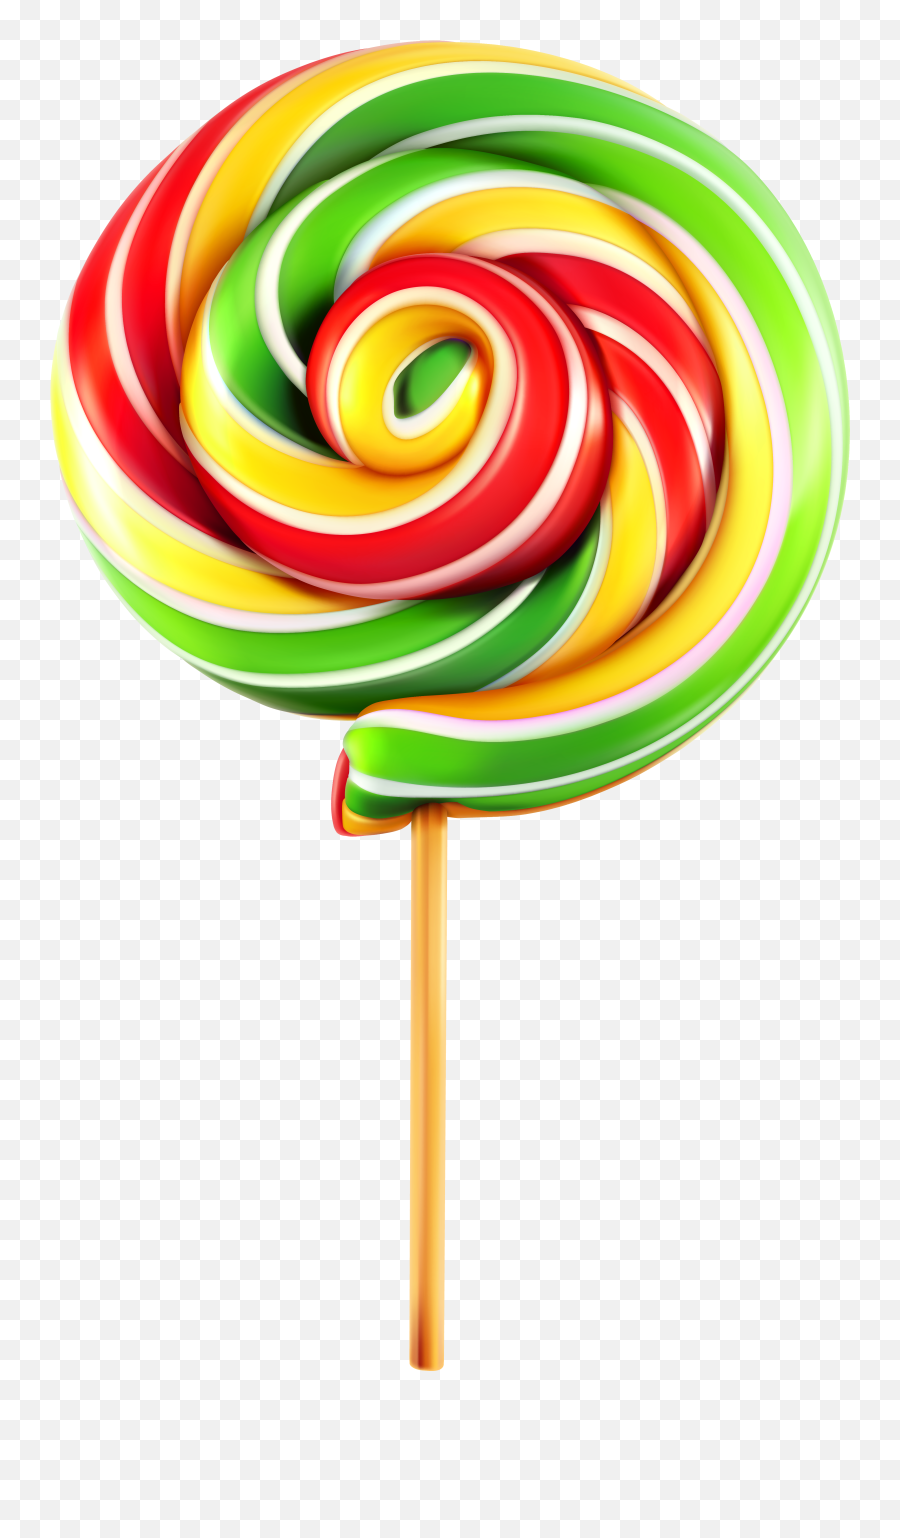 Png Free Images Toppng - Lollipop Png Clipart Full Size Lollipop Png Emoji,Emoji Suckers